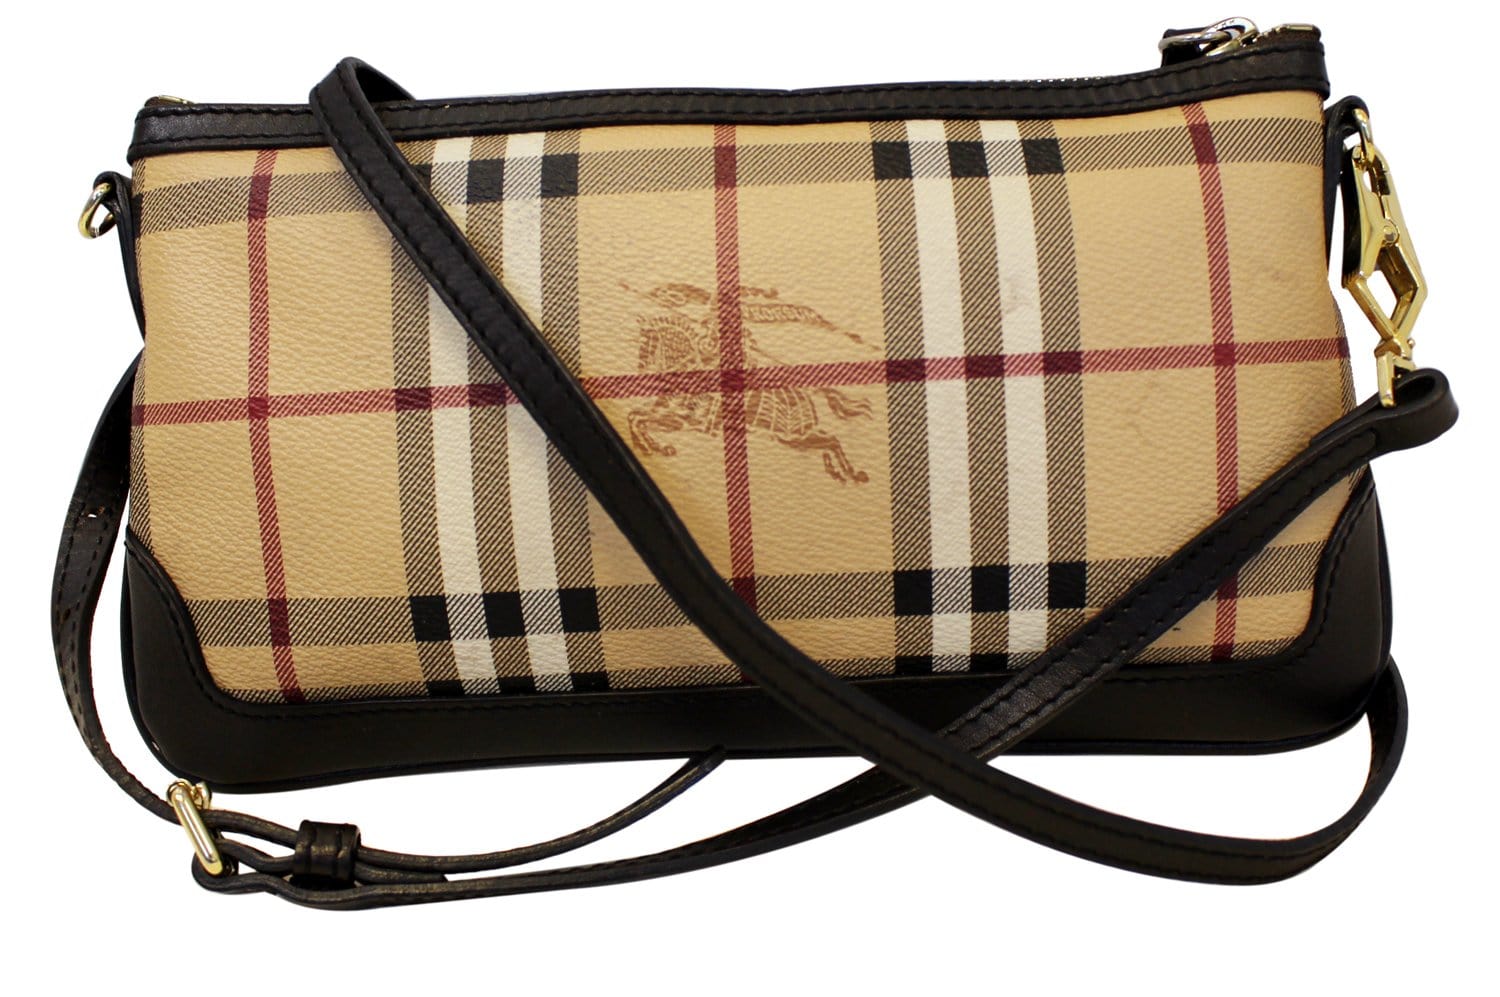 Burberry Haymarket Check Coated Canvas Tote